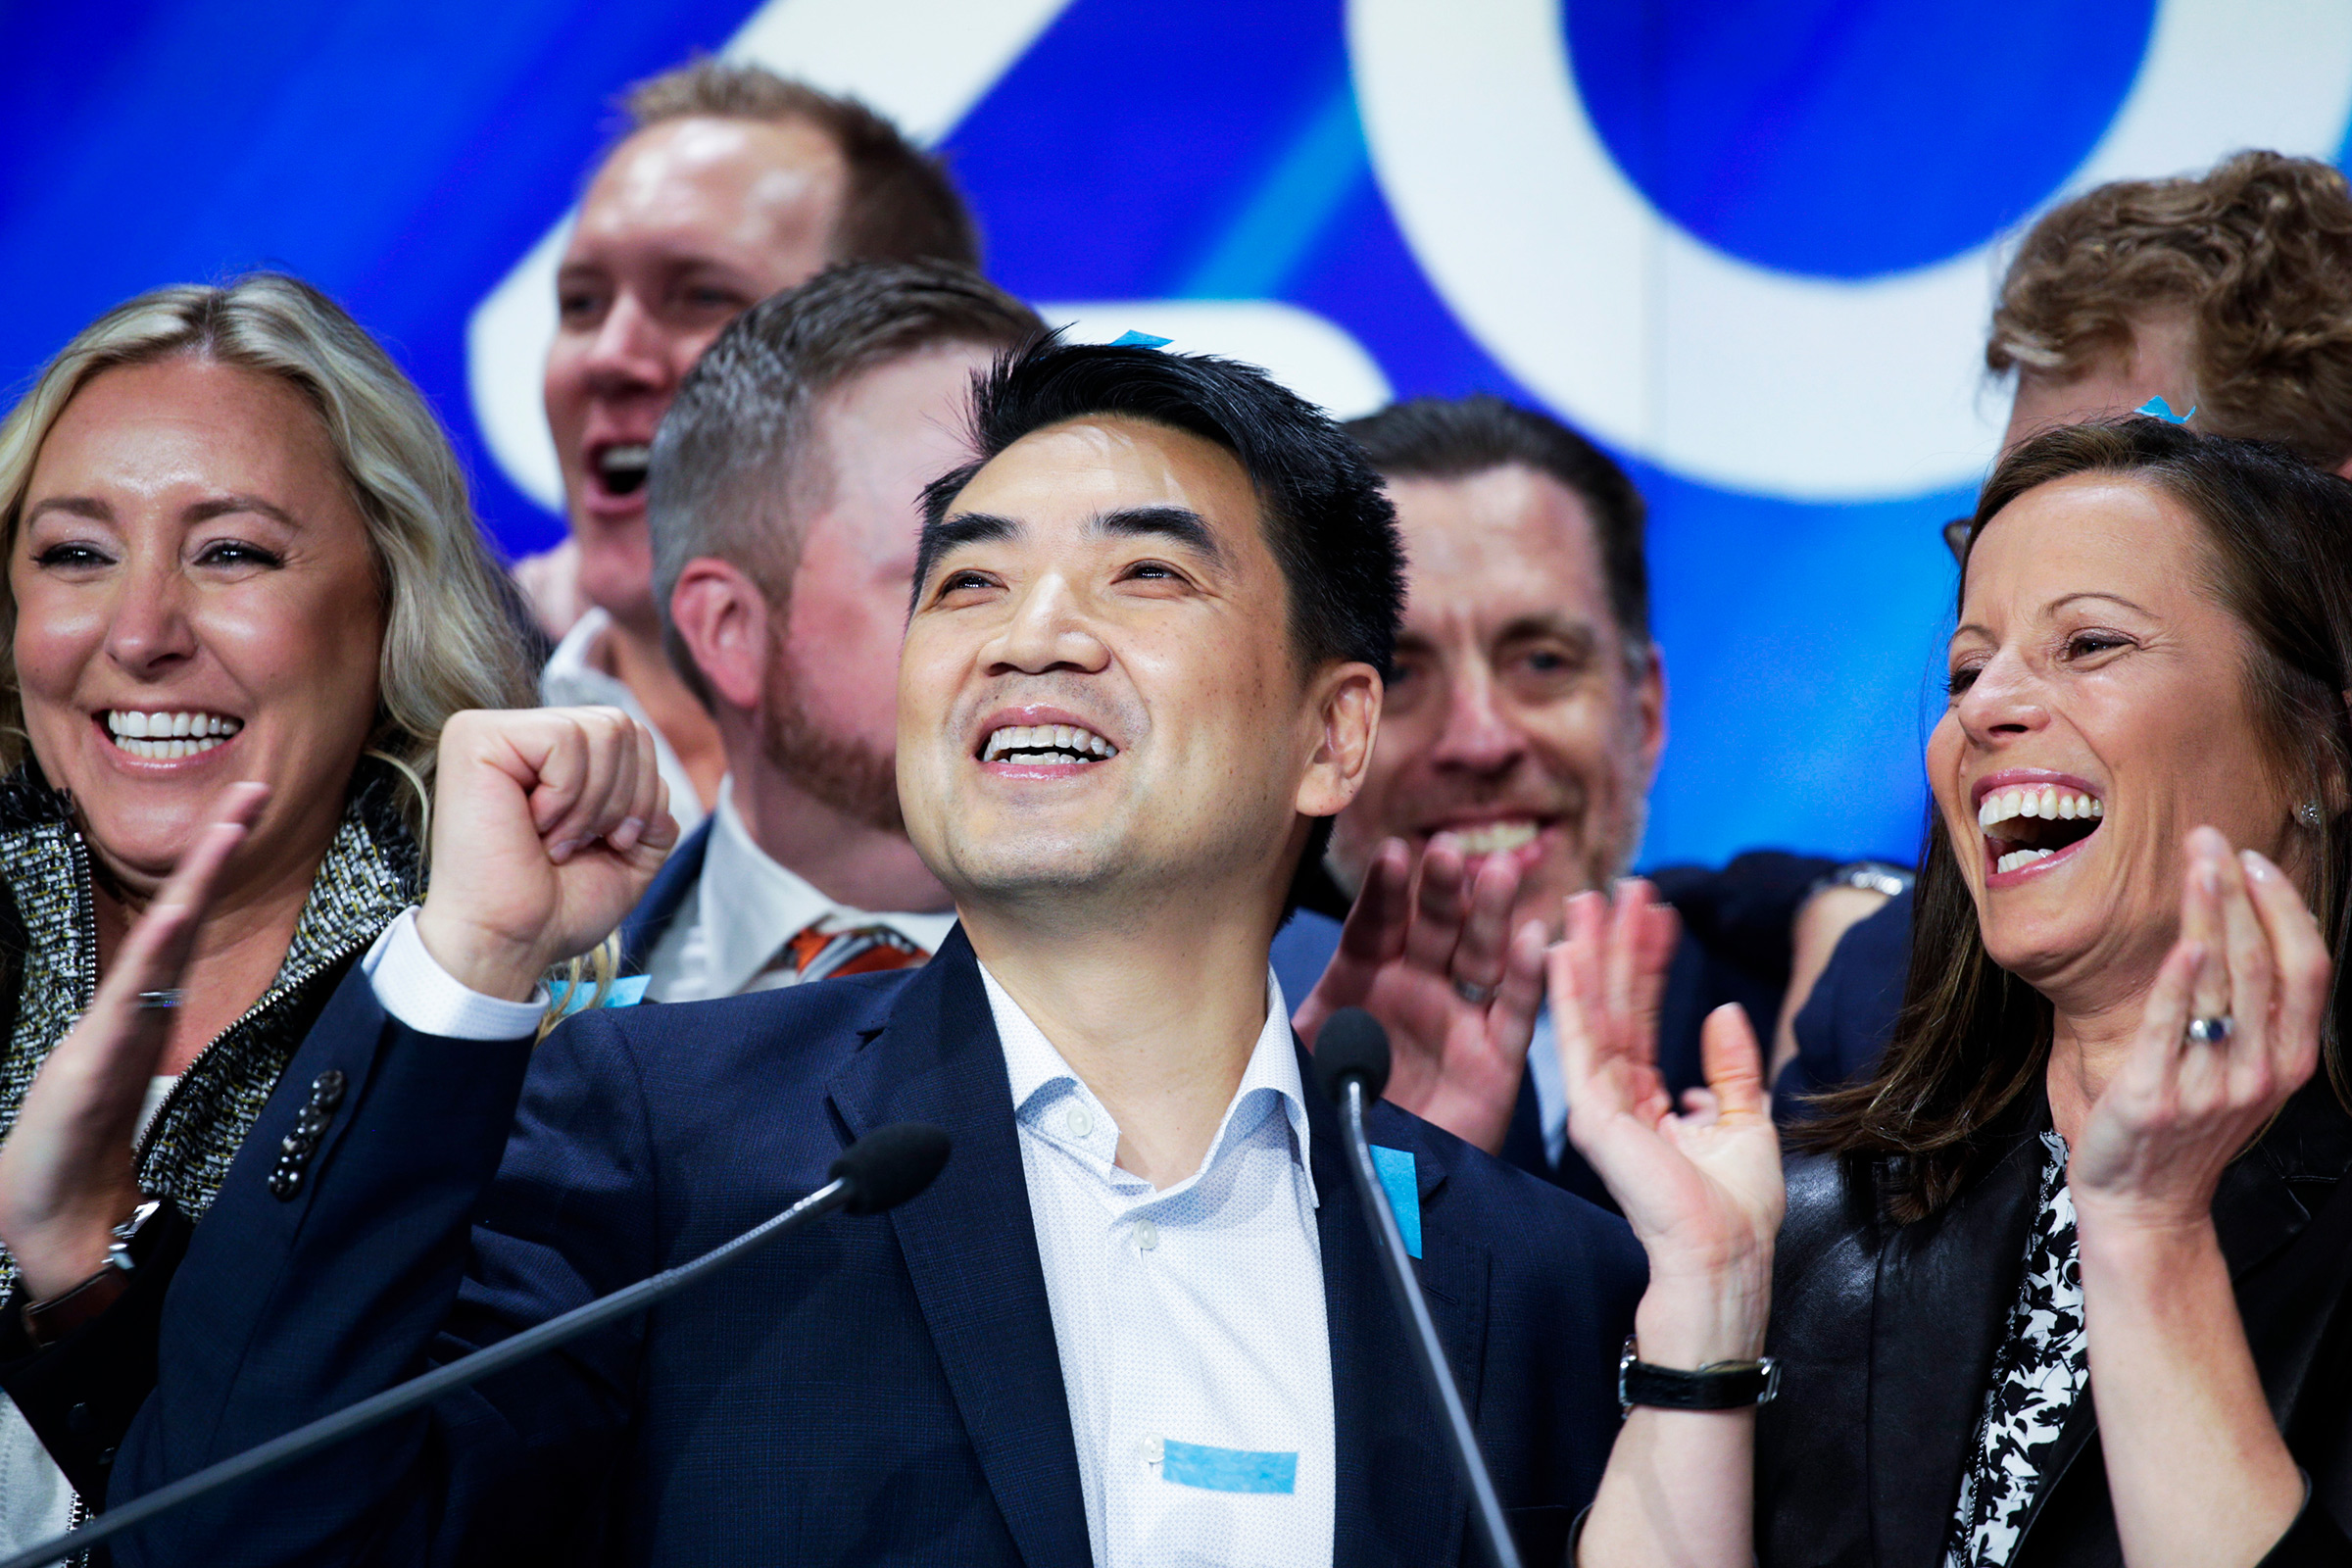 Zoom founder Eric Yuan reacts at the Nasdaq opening bell ceremony in New York City on April 18, 2019. (Kena Betancur—Getty Images)